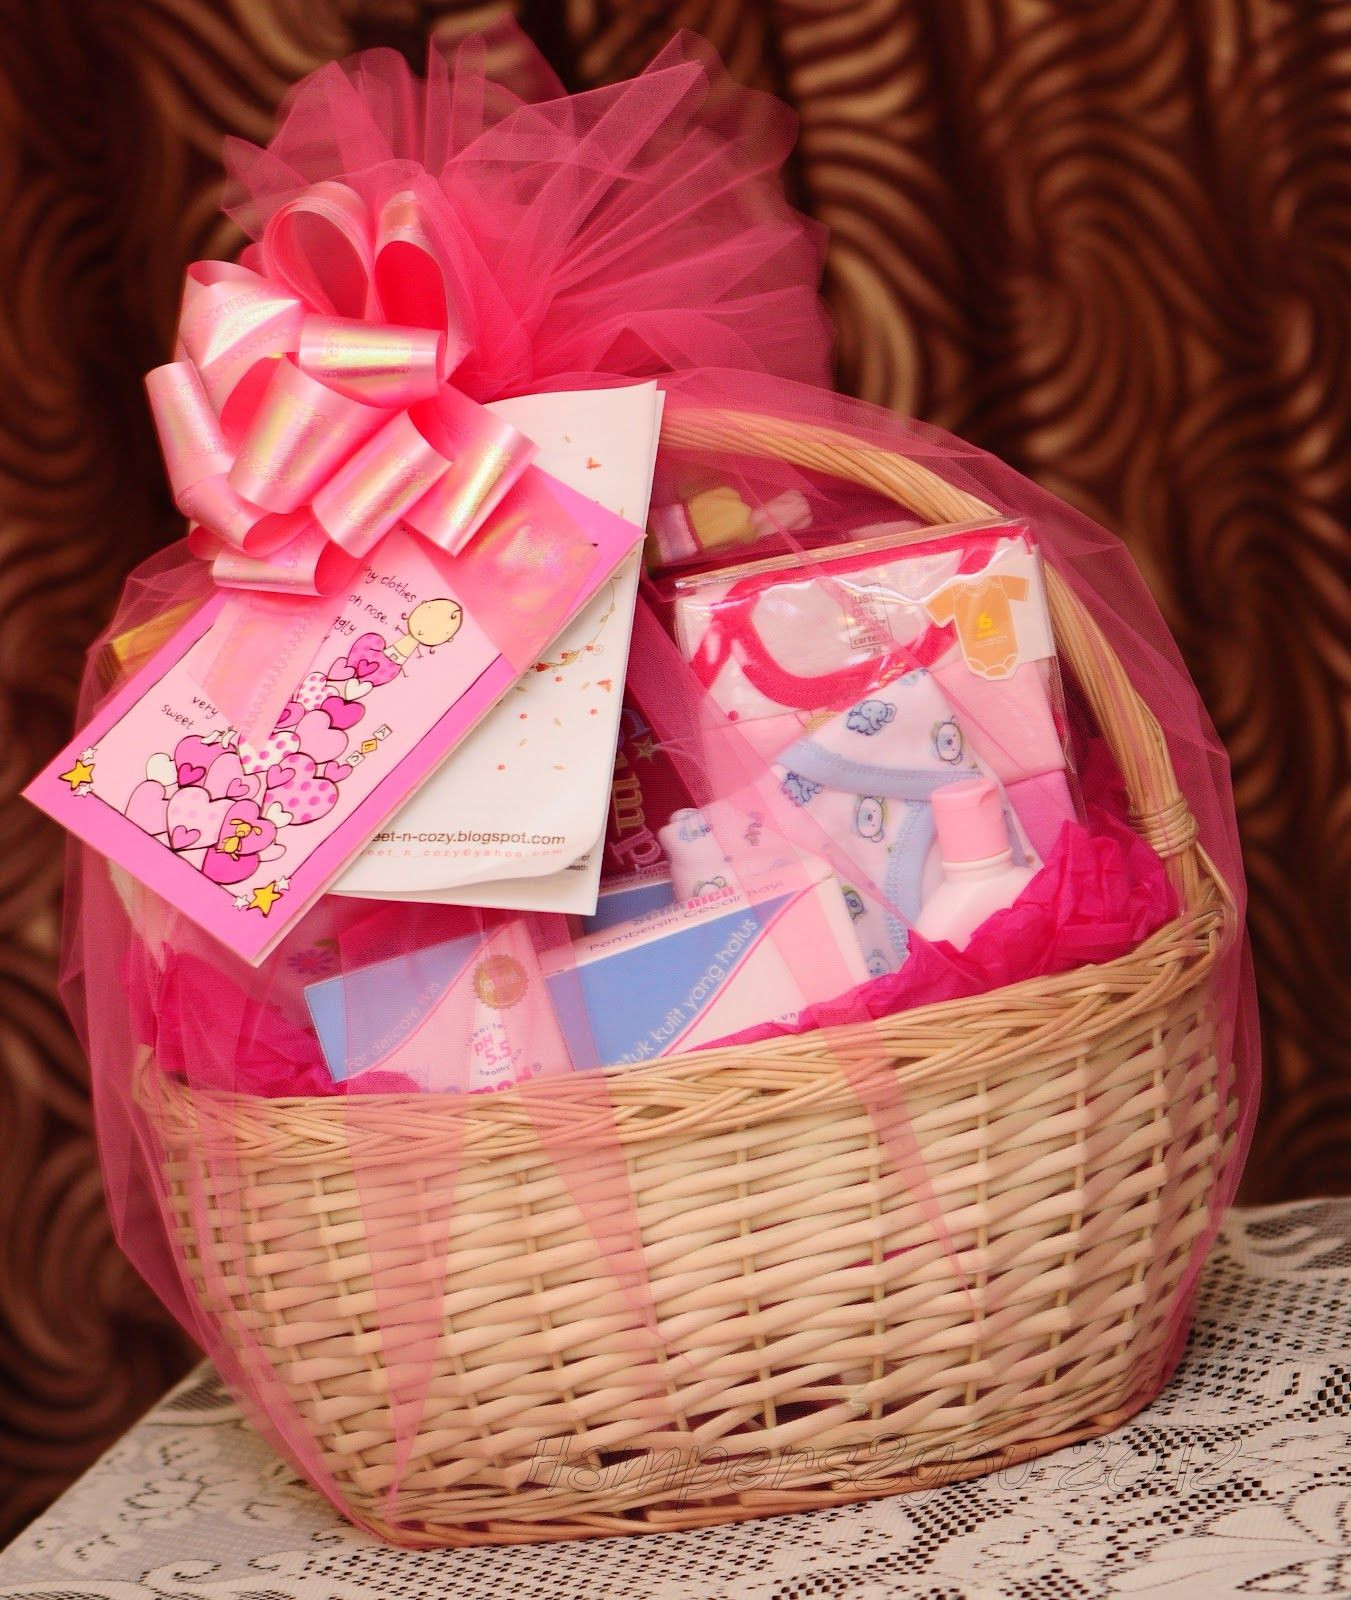 Baby Born Gifts Ideas
 Baby Gift Baskets